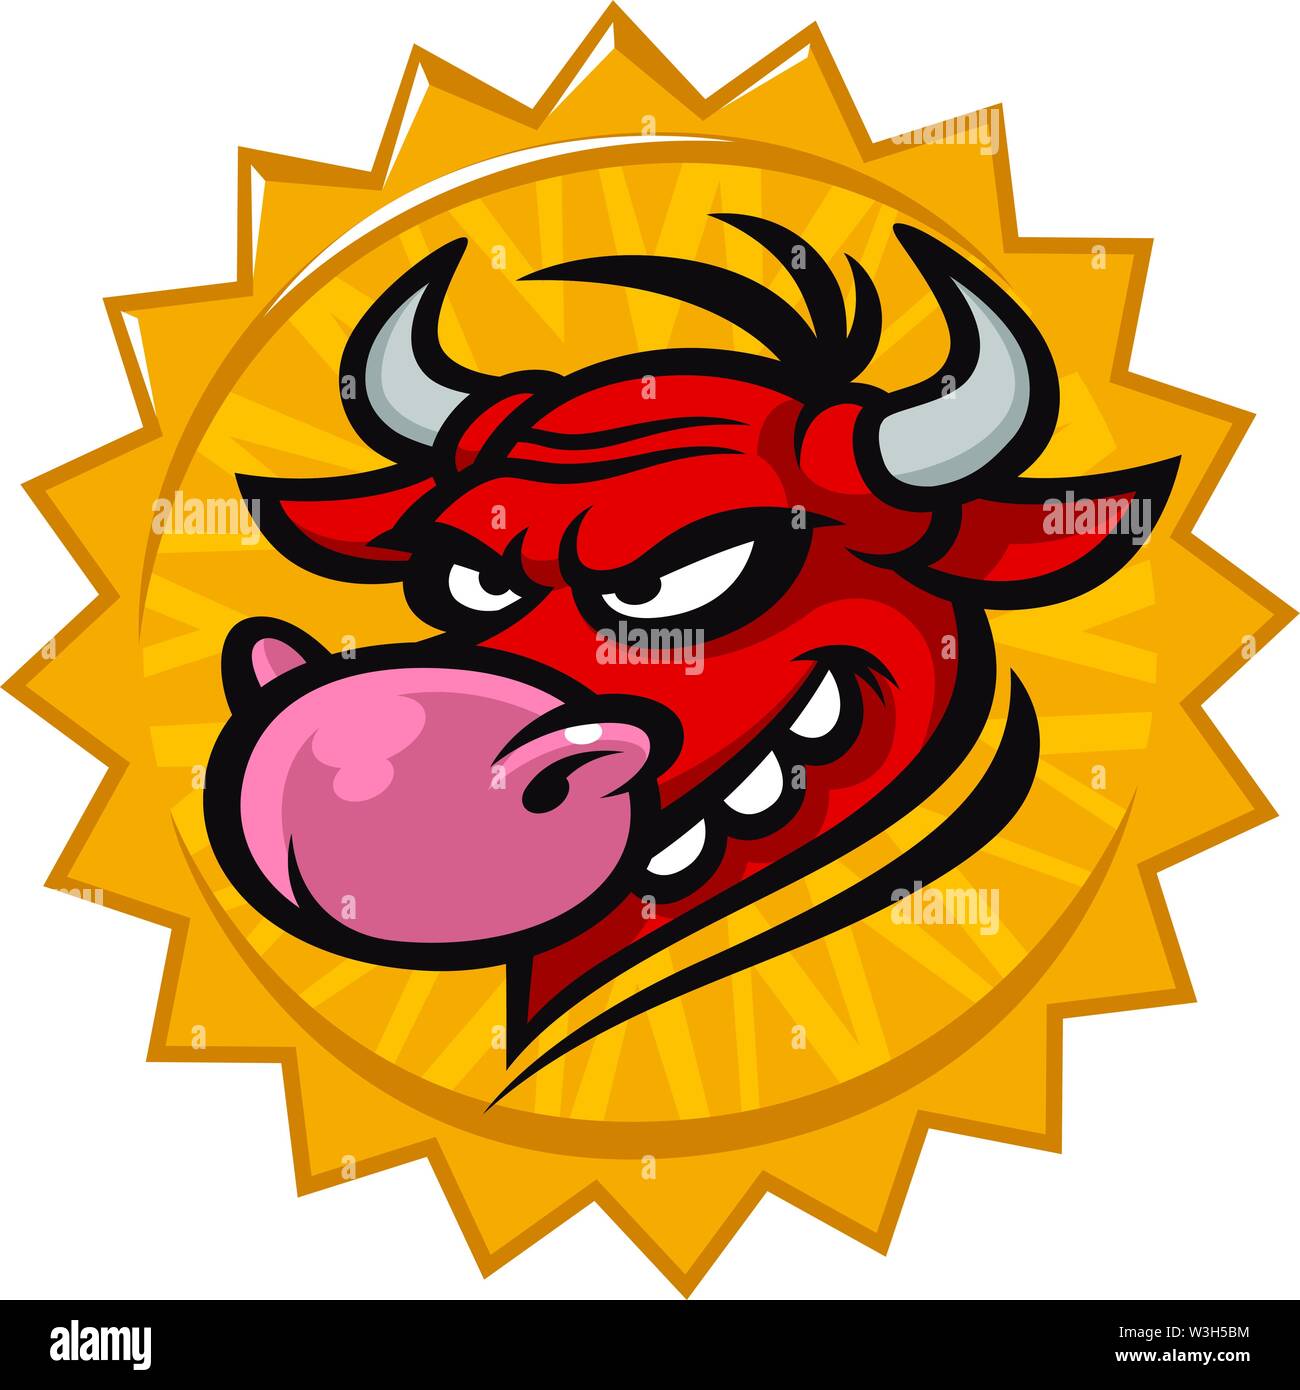 Cartoon head of a bull. Vector illustration of a mascot head. Emblem for printing. A horned cute animal. Image is isolated on white background. Stock Vector